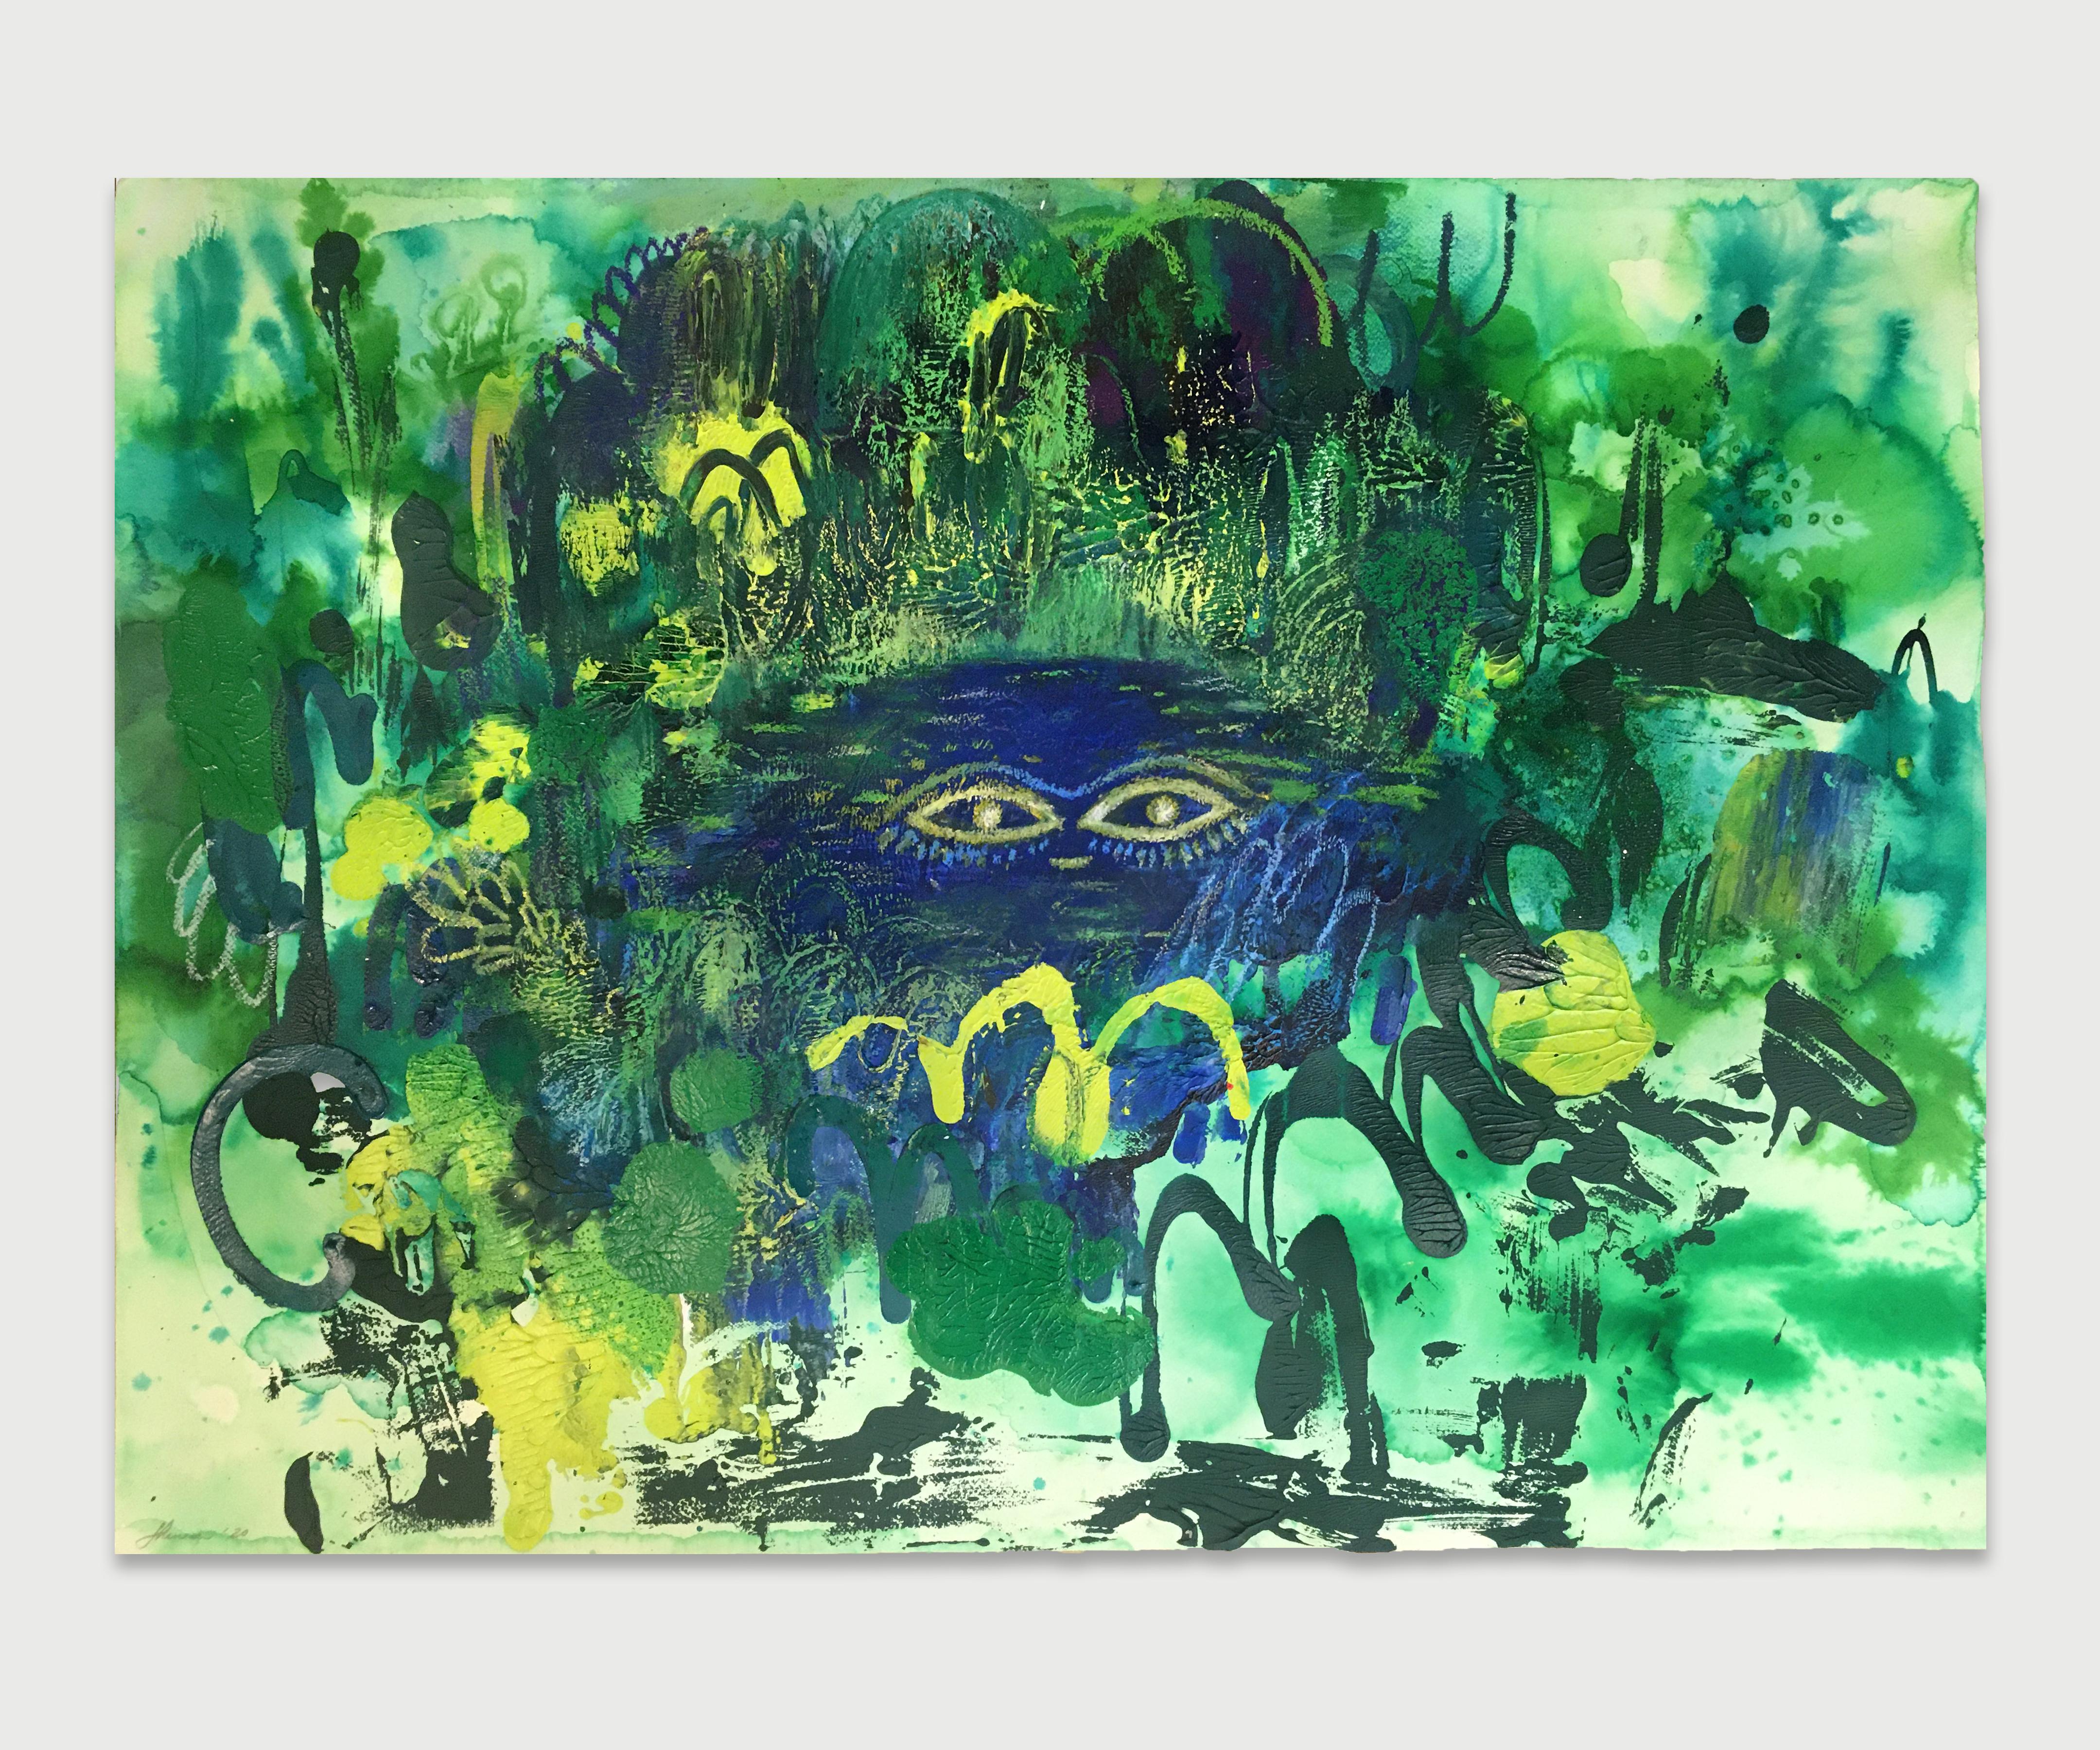 Pond Friend, 2020, watercolor, oil pastel, green, frame, landscape, fantasy - Painting by Shamona Stokes